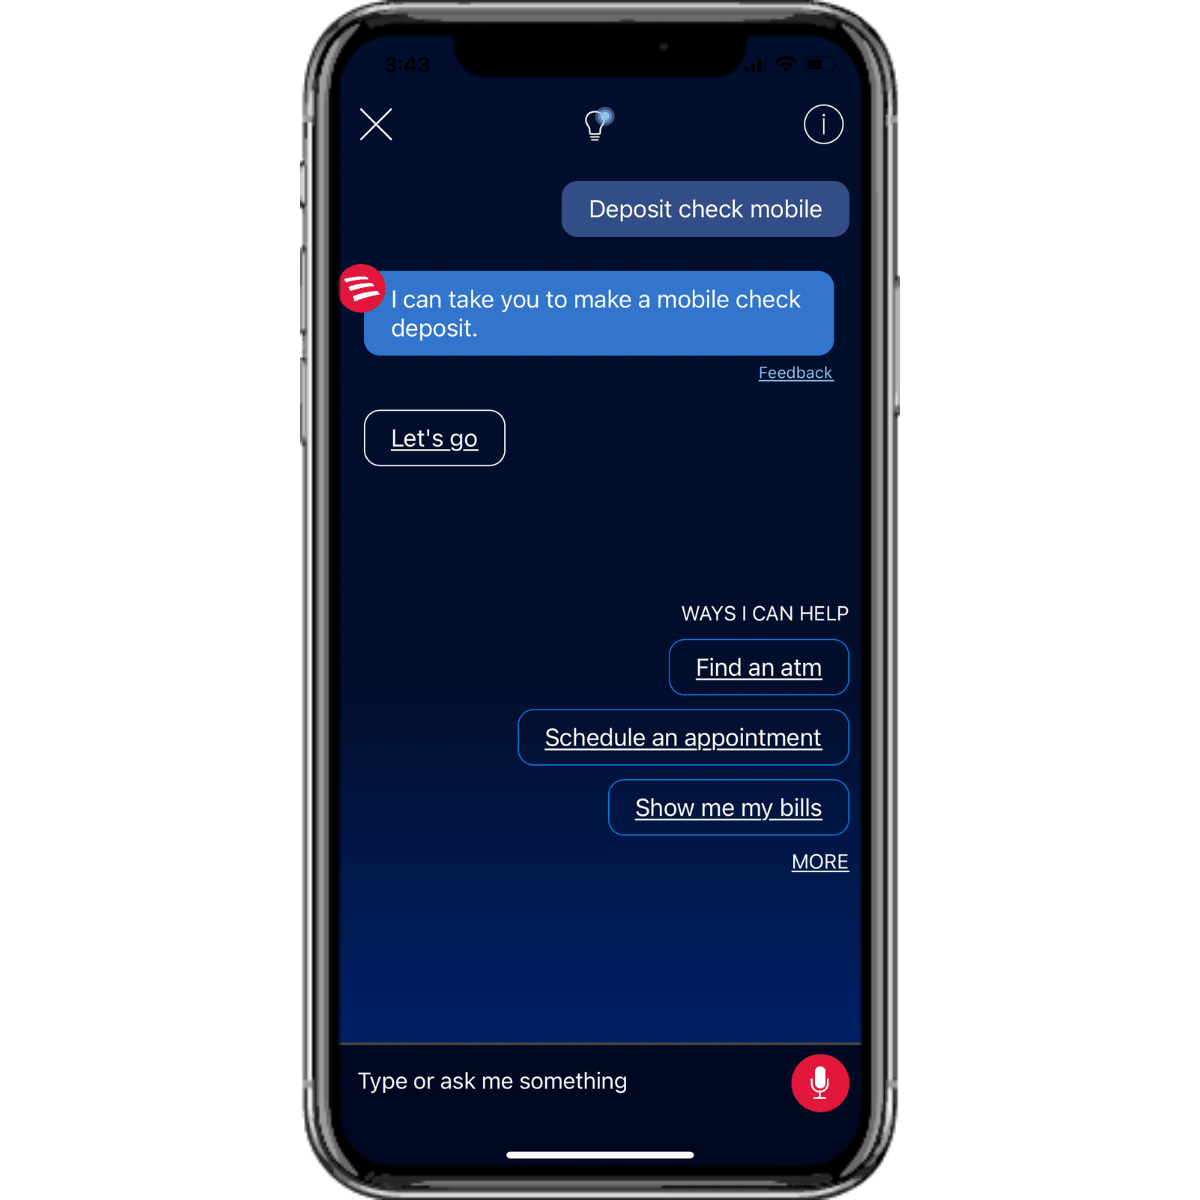 A screenshot from an iPhone 12 shows what the Bank of America “Erica” chatbot looks like inside of customers’ mobile apps. The bot can help users, for instance, make a bank deposit  by: finding an atm, scheduling an appointment, showing me my bills.